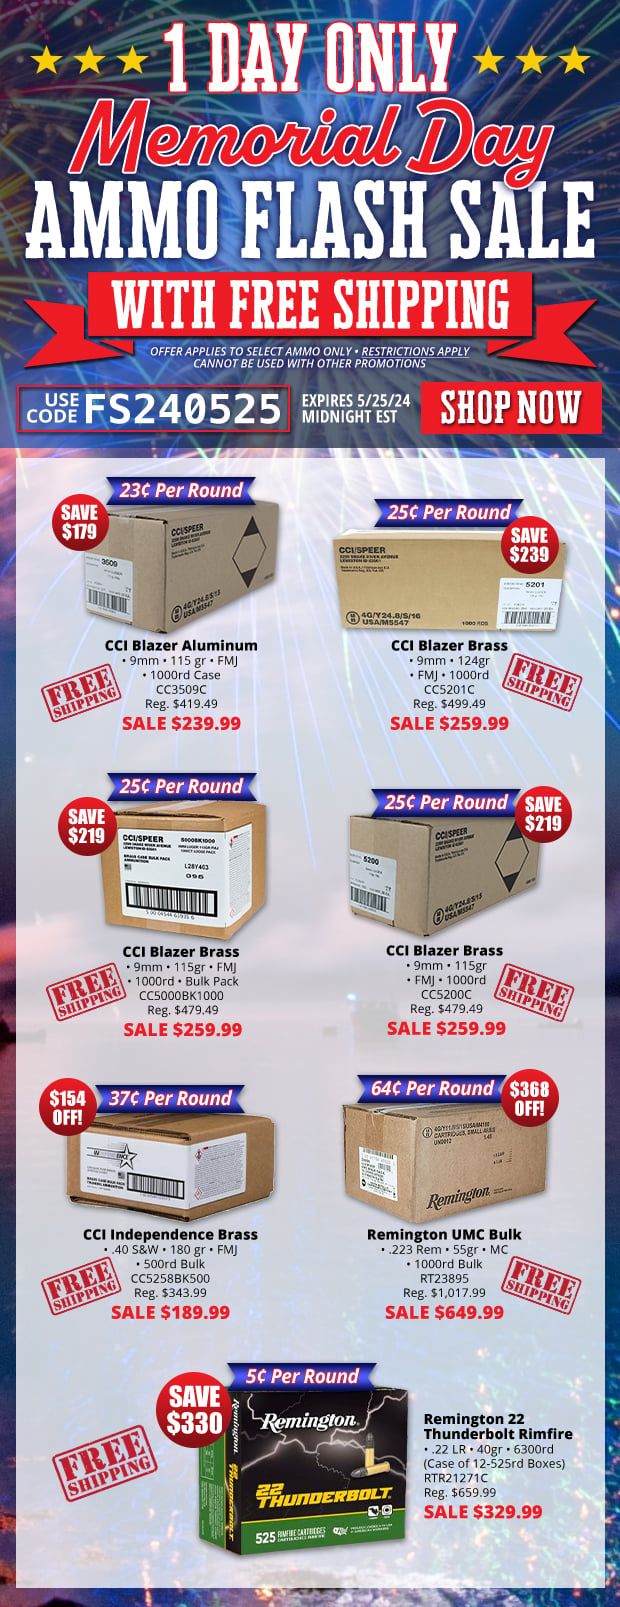 1 Day Only Ammo Flash Sale with Free Shipping  Restrictions Apply  Use Code FS240525